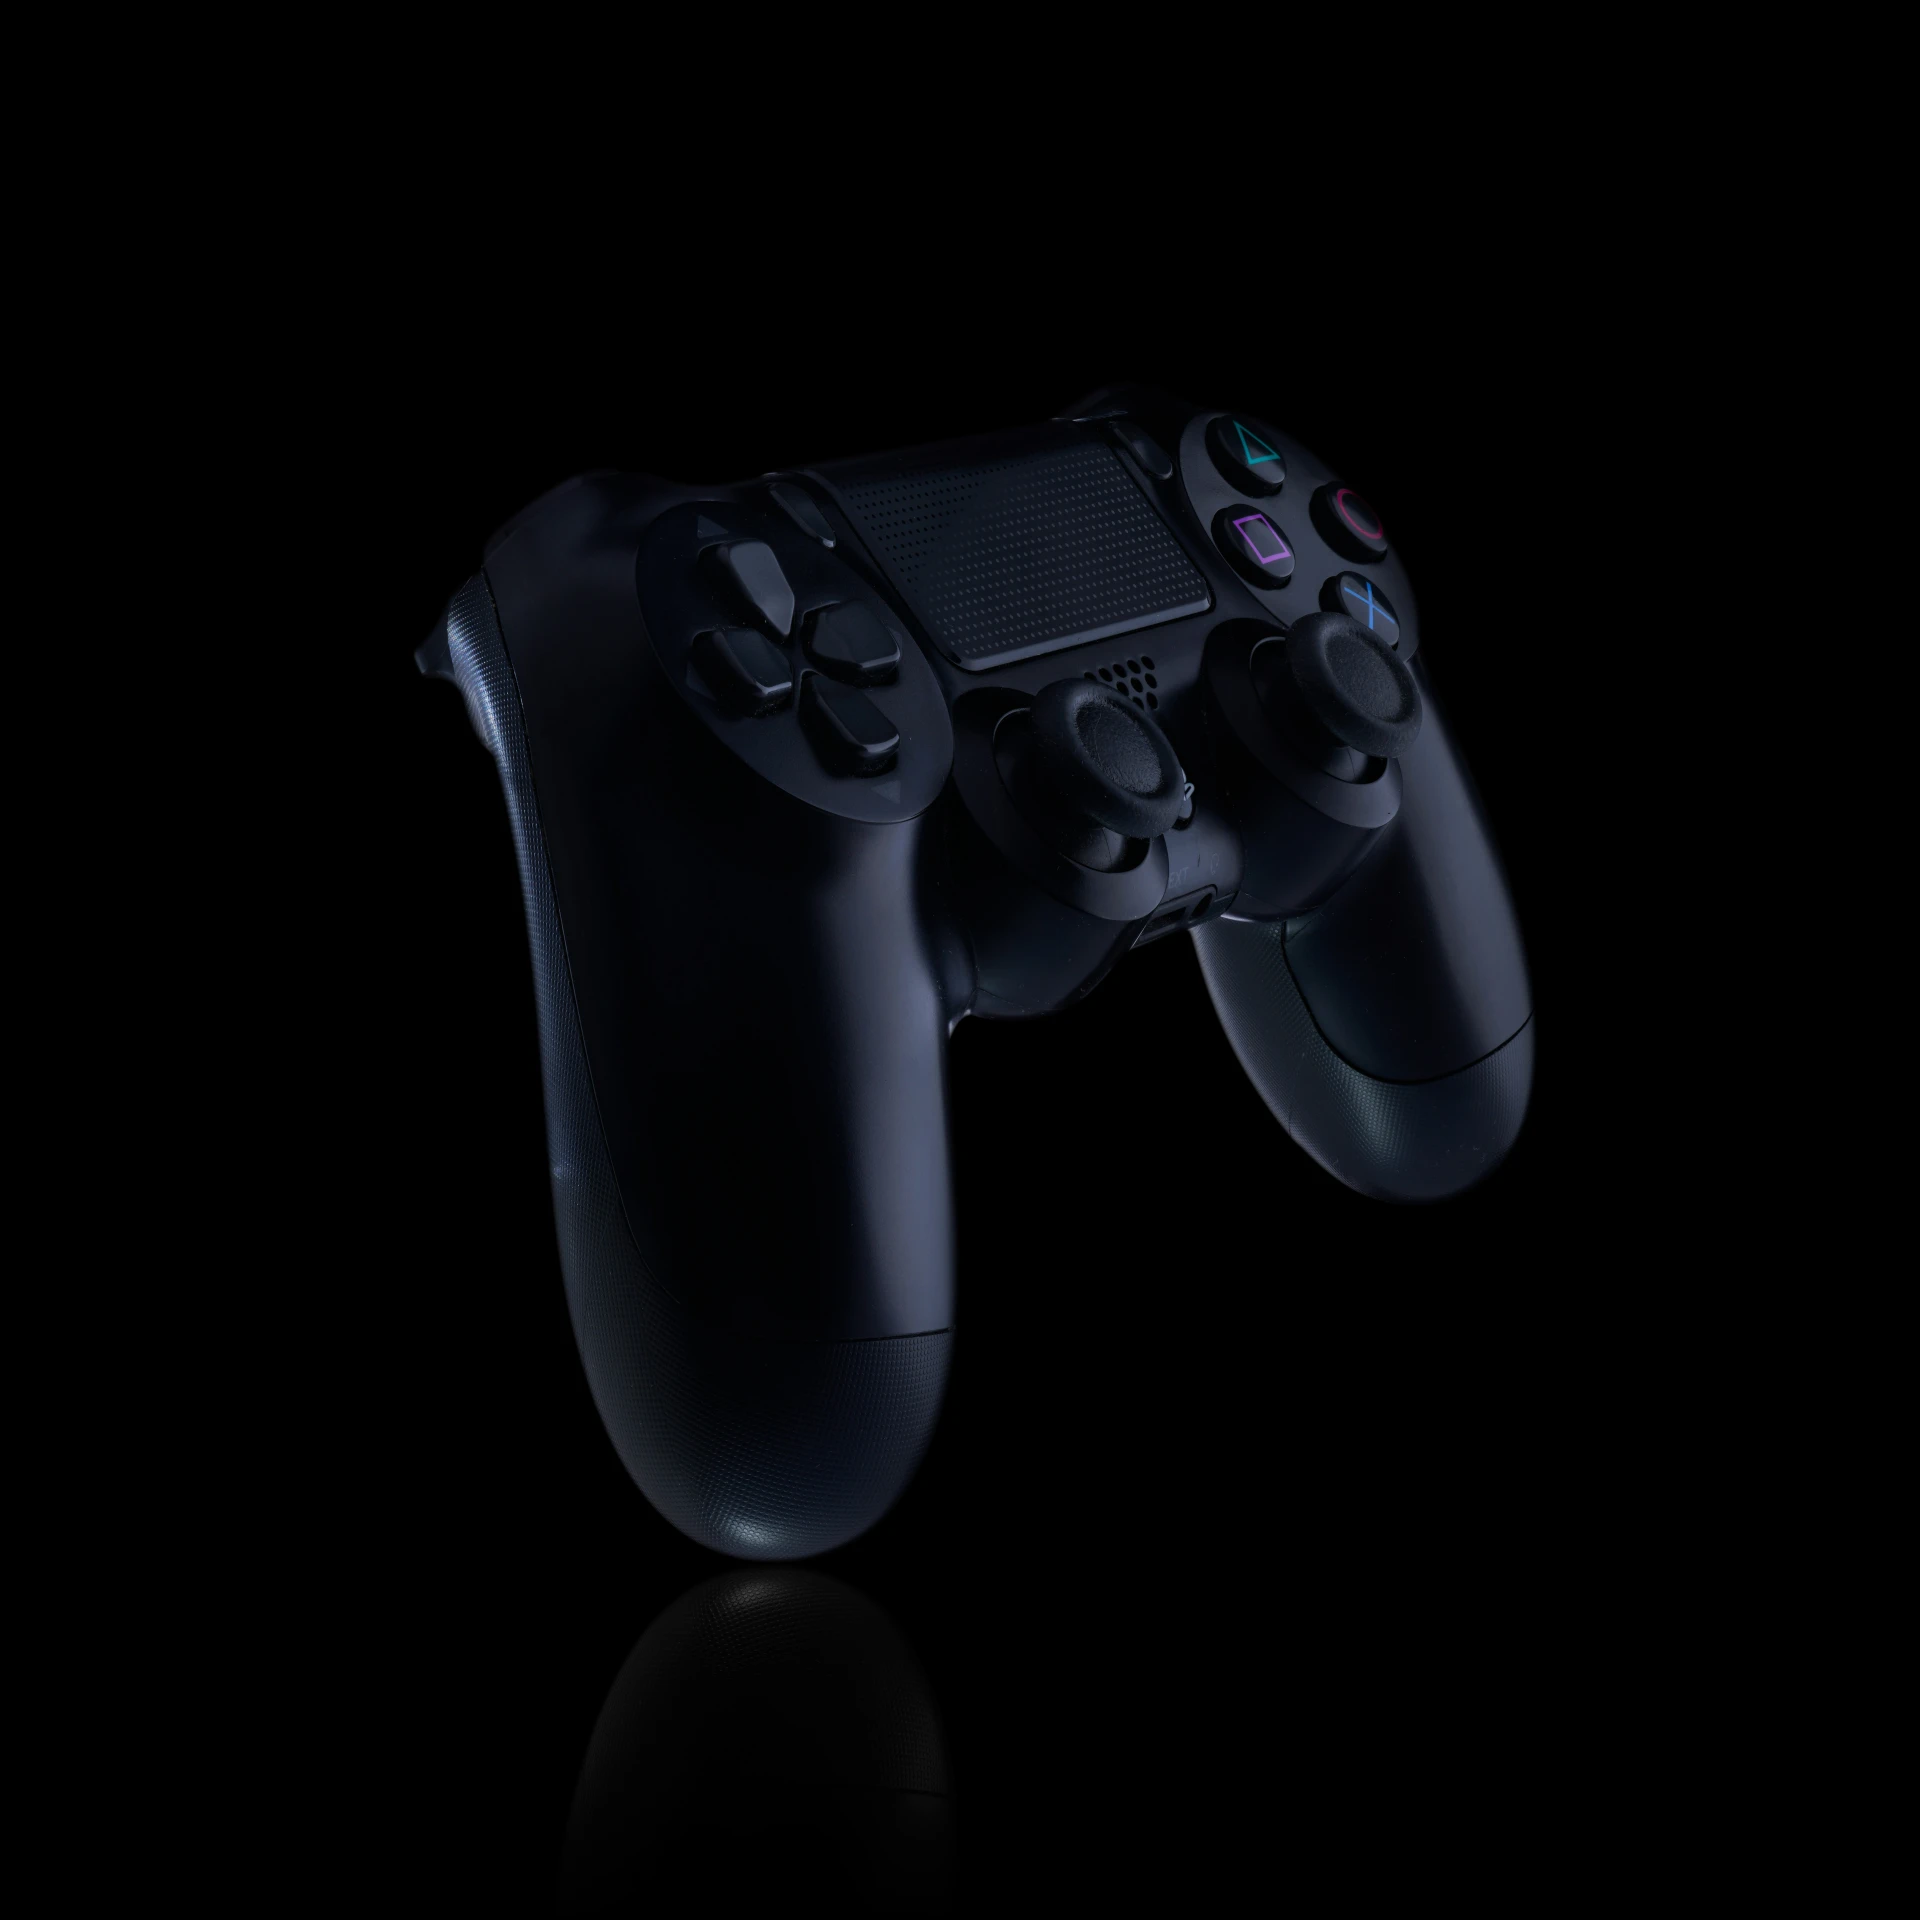 two controllers facing each other on the same side of a black surface